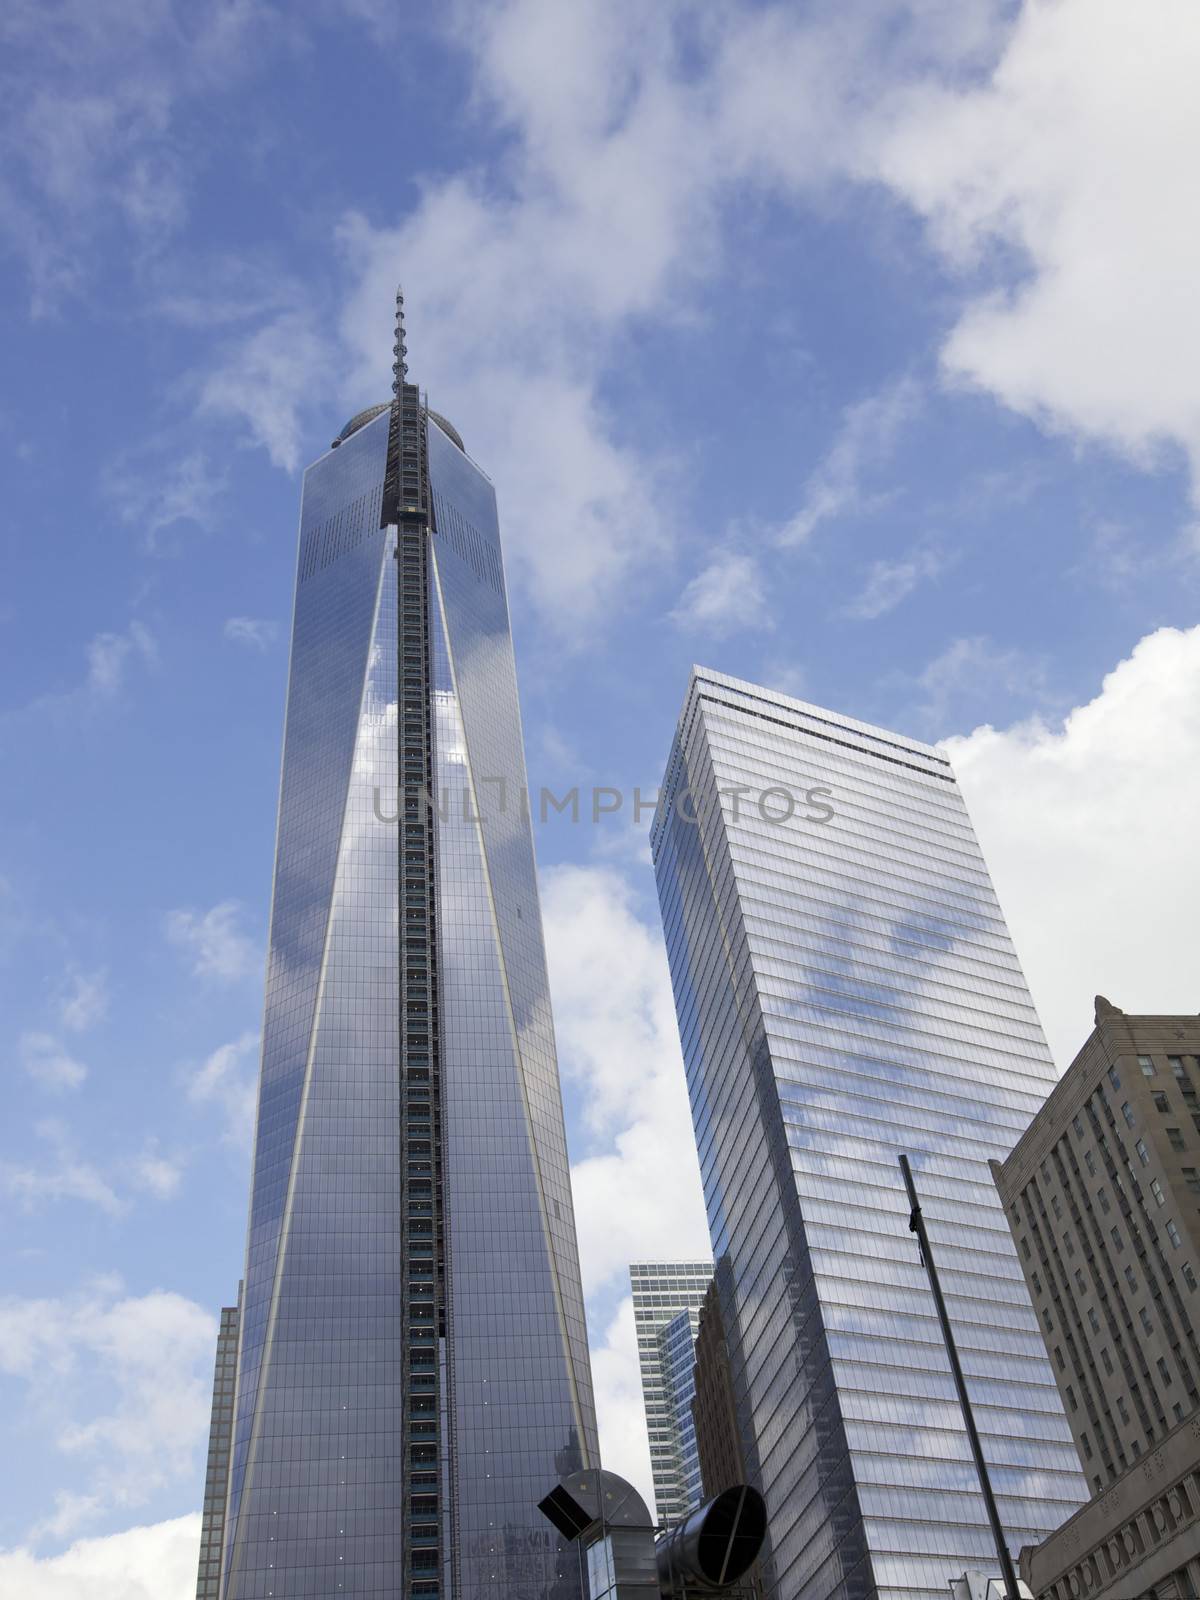 Building the Freedom Tower in lower Manhattan, New York City, USA.
Photo taken on: September 29th, 2013.
Terrorism attacks on September 11, 2001 in Manhattan, NY.